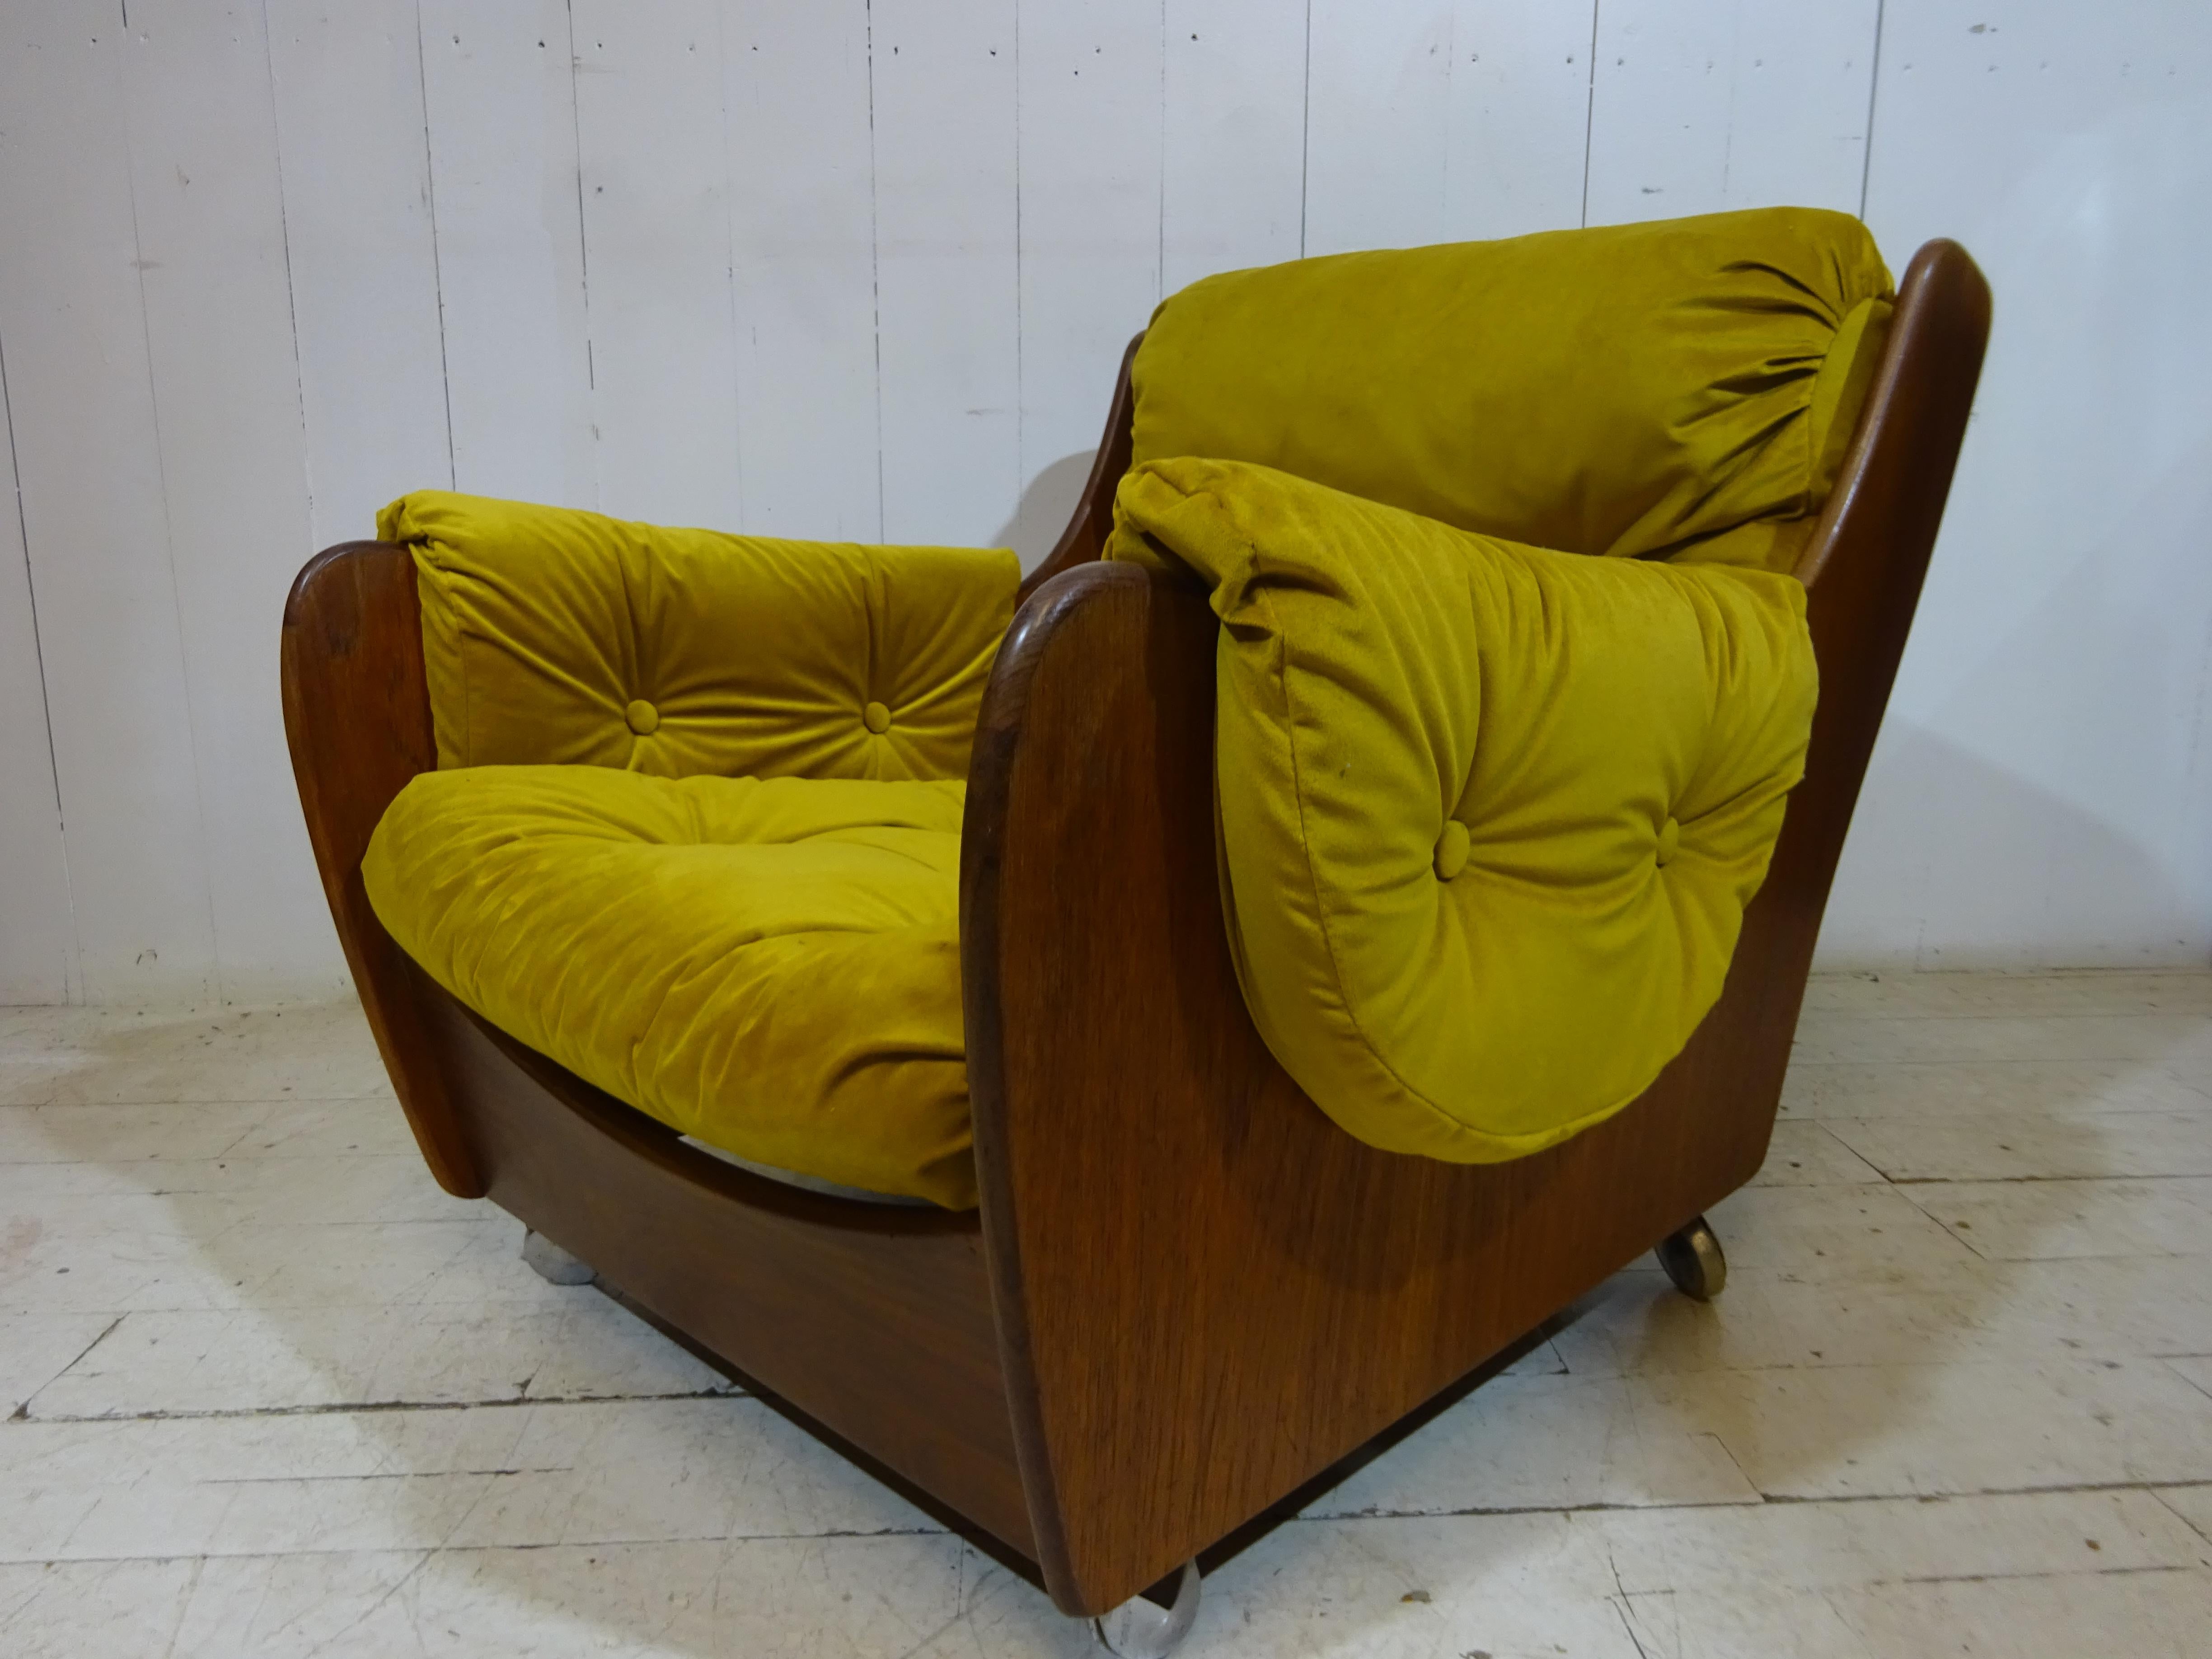 Armchair by G Plan

Love the shape and textures of this fabulous, super comfy chair! 

G Plan 

The company was founded in High Wycombe in 1898 by Ebeneezer Gomme,at first making hand-made chairs, and building a factory at Leigh Street in